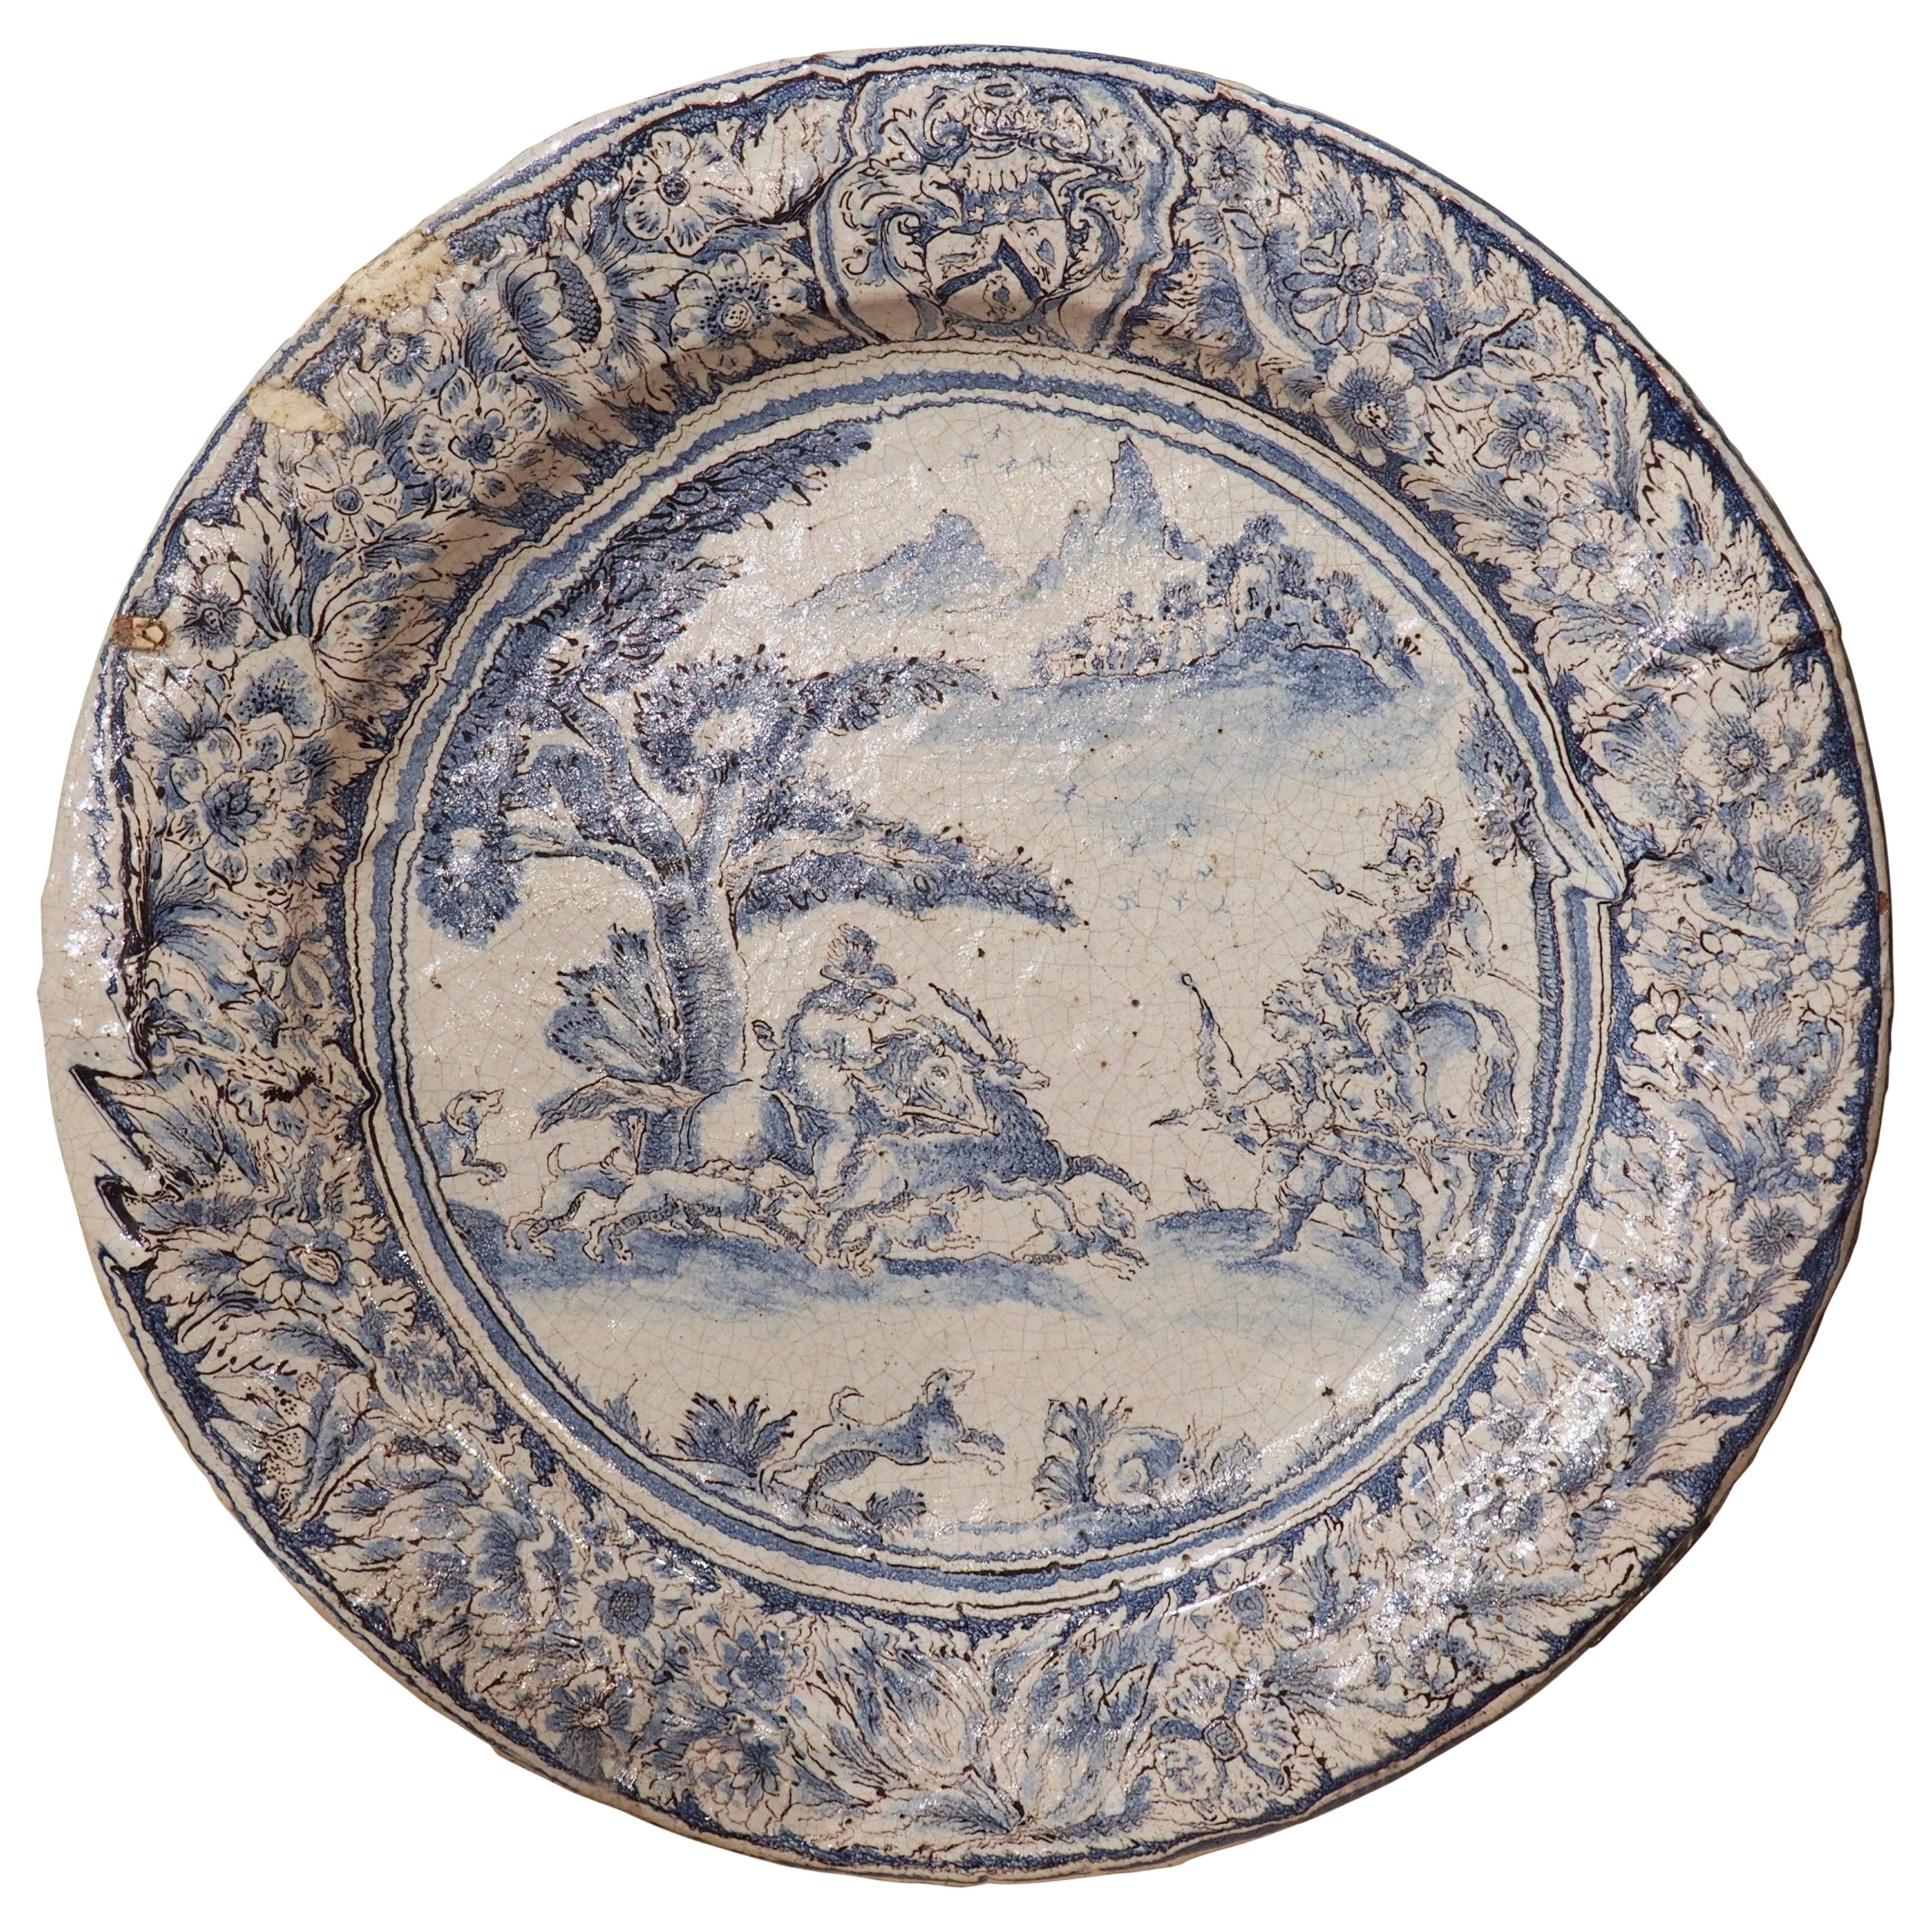 Large 17th Century French Blue and White Faience Platter with Stag Hunt Scene